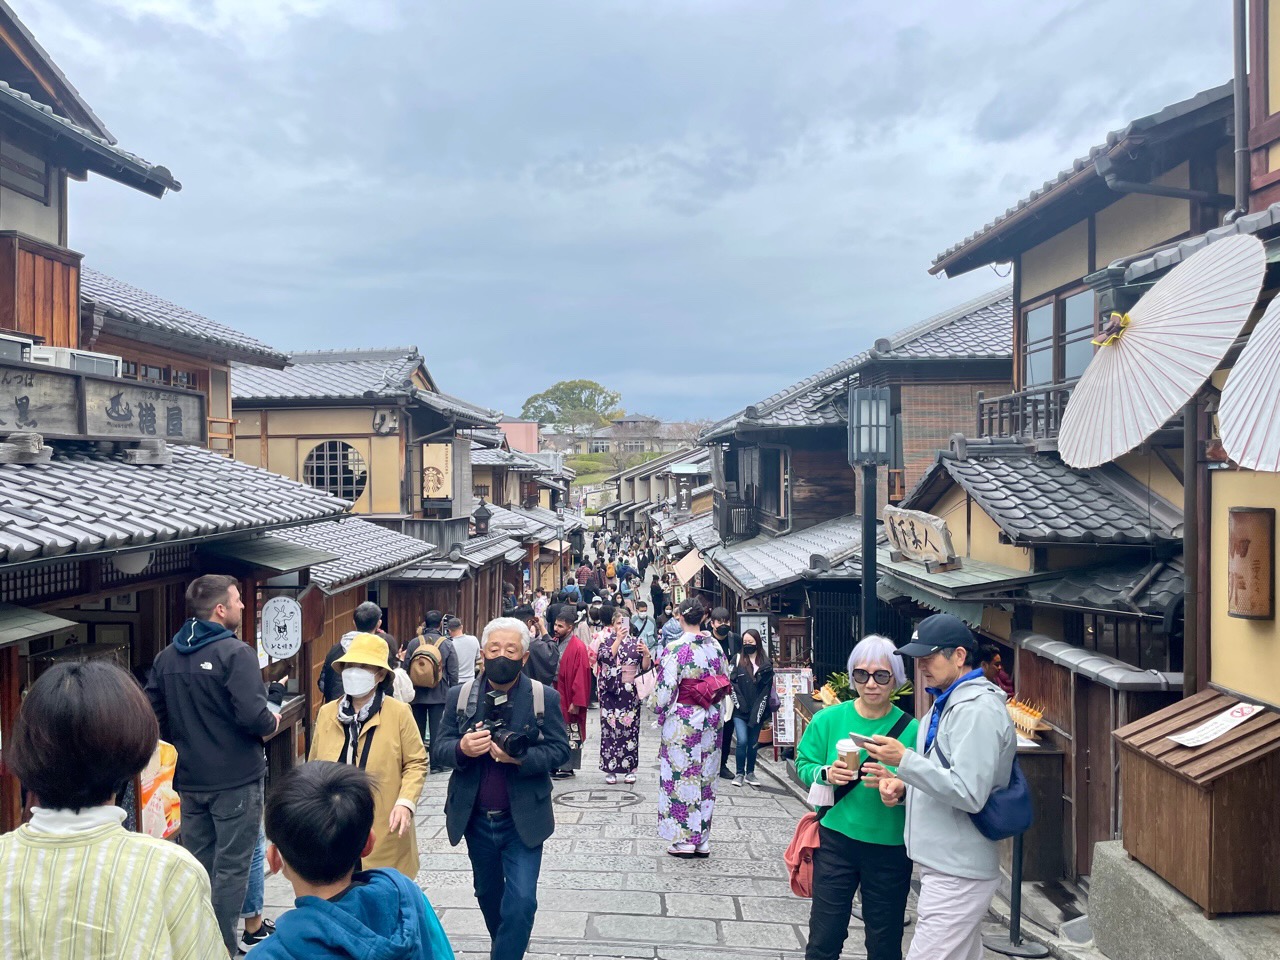 Gion District- The Old City